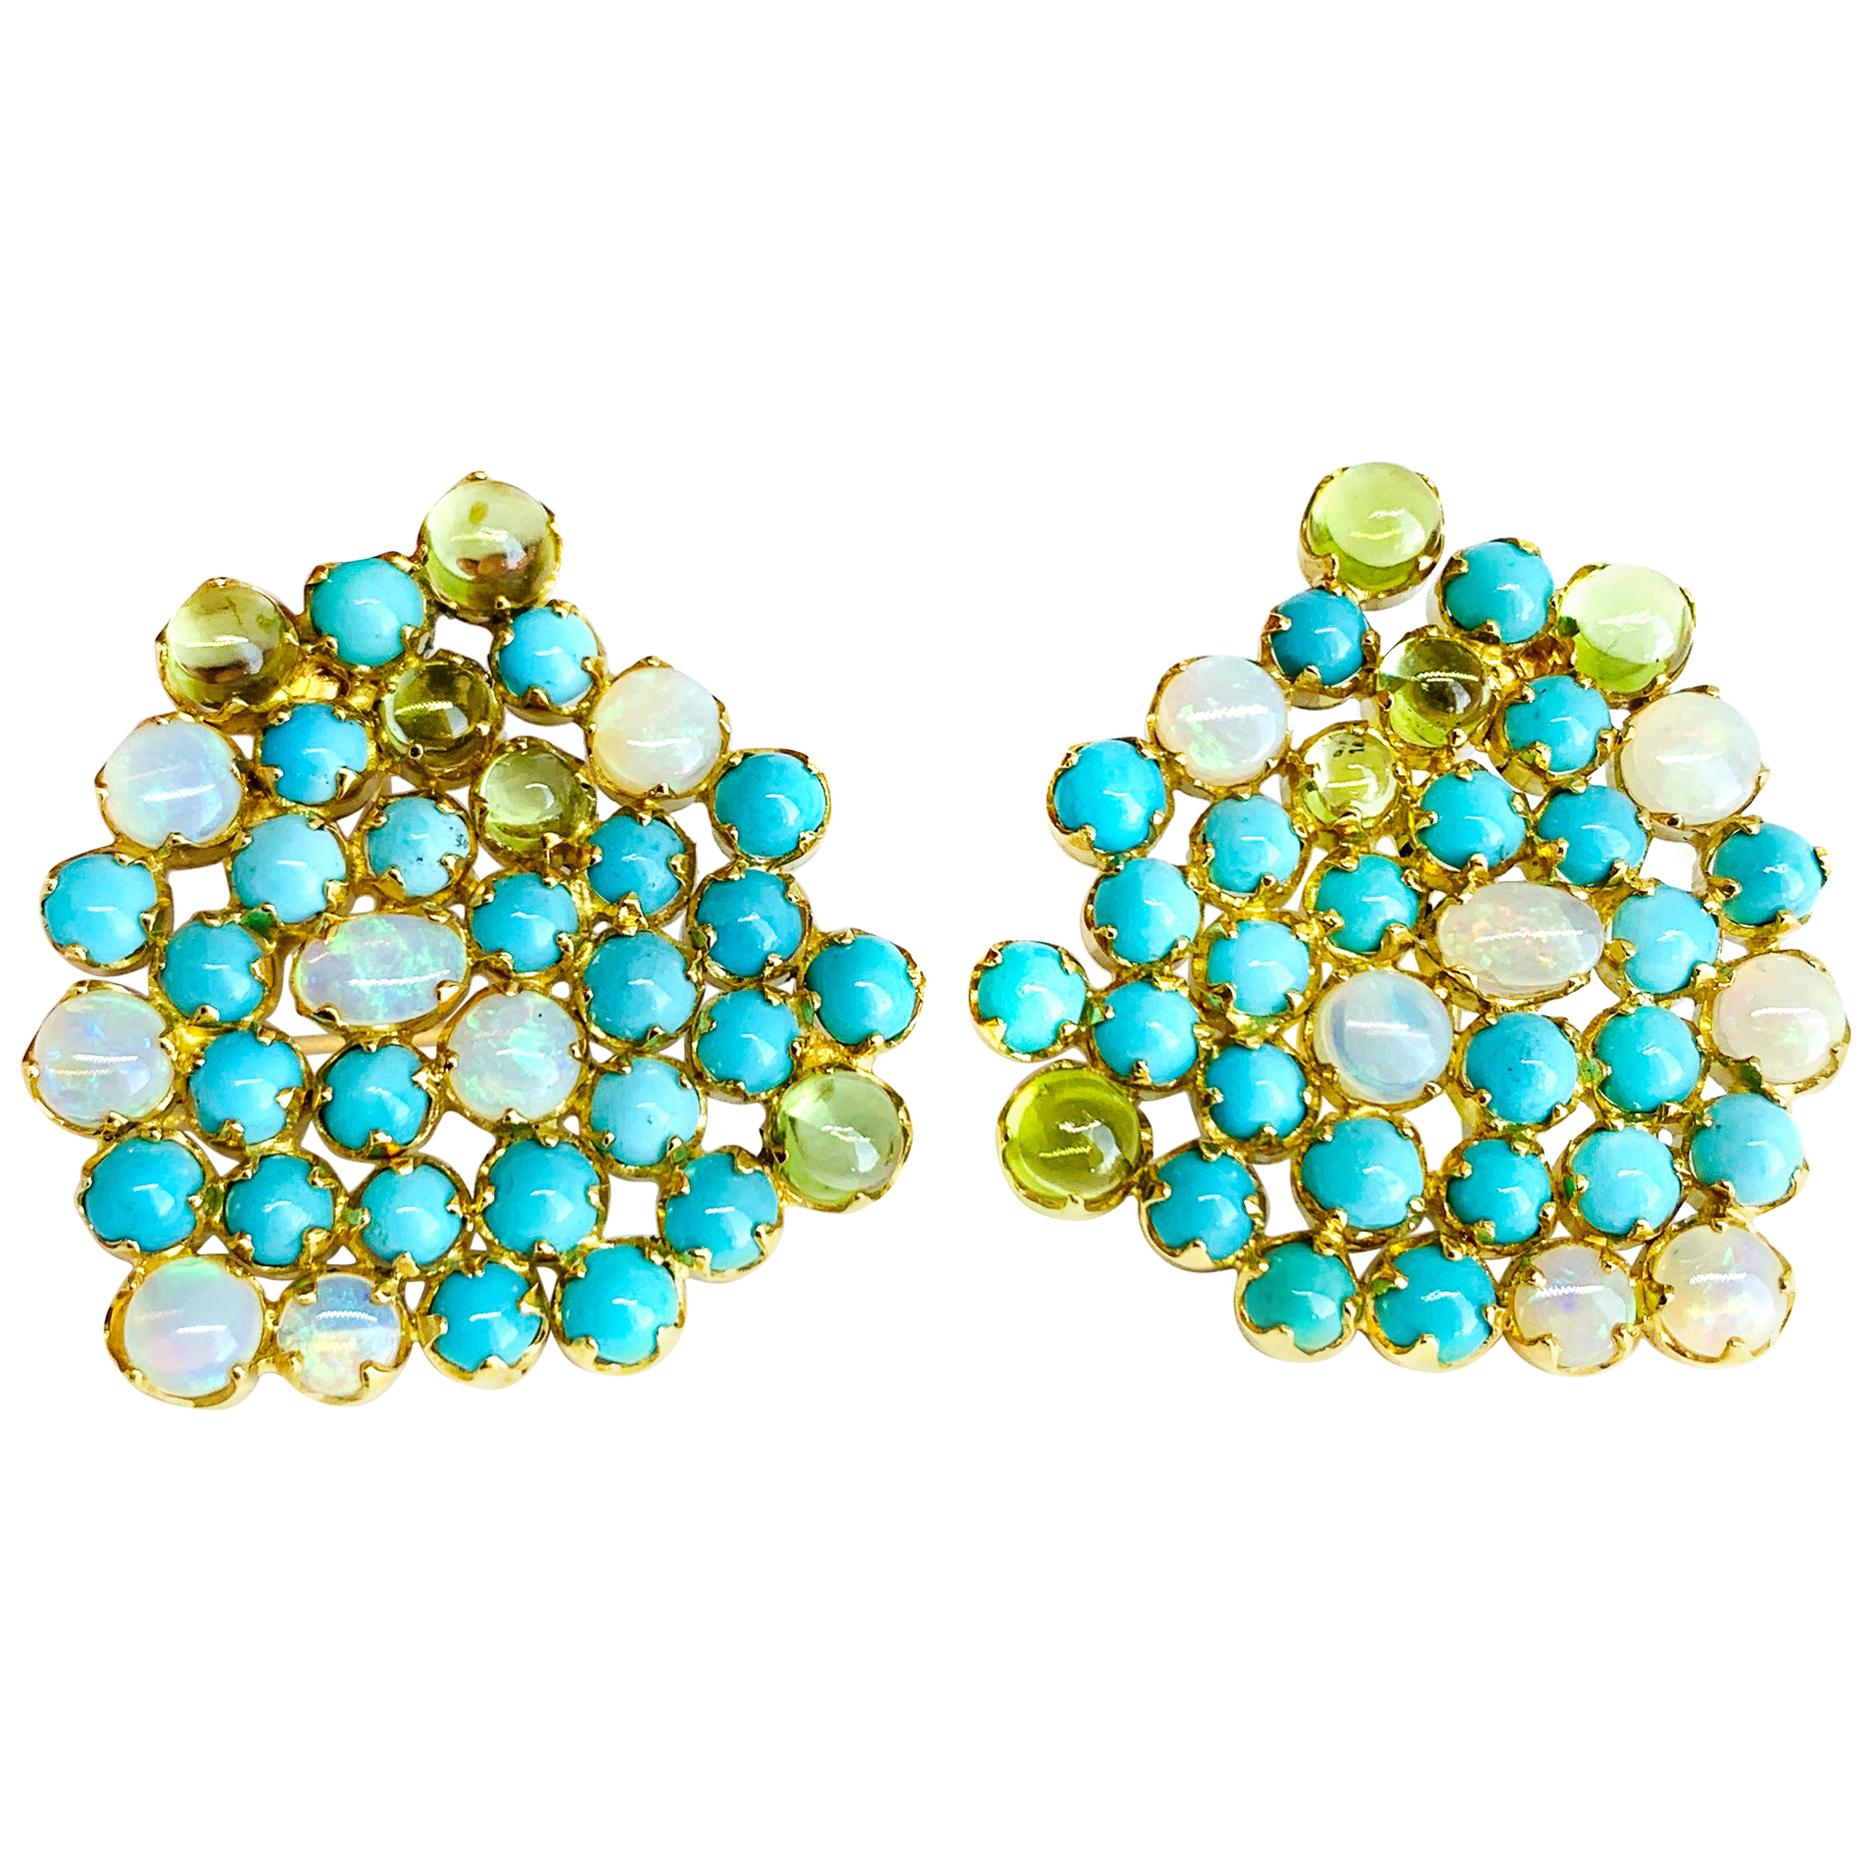 Turquoise, Peridot and Opal Contemporary Earrings in Yellow Gold